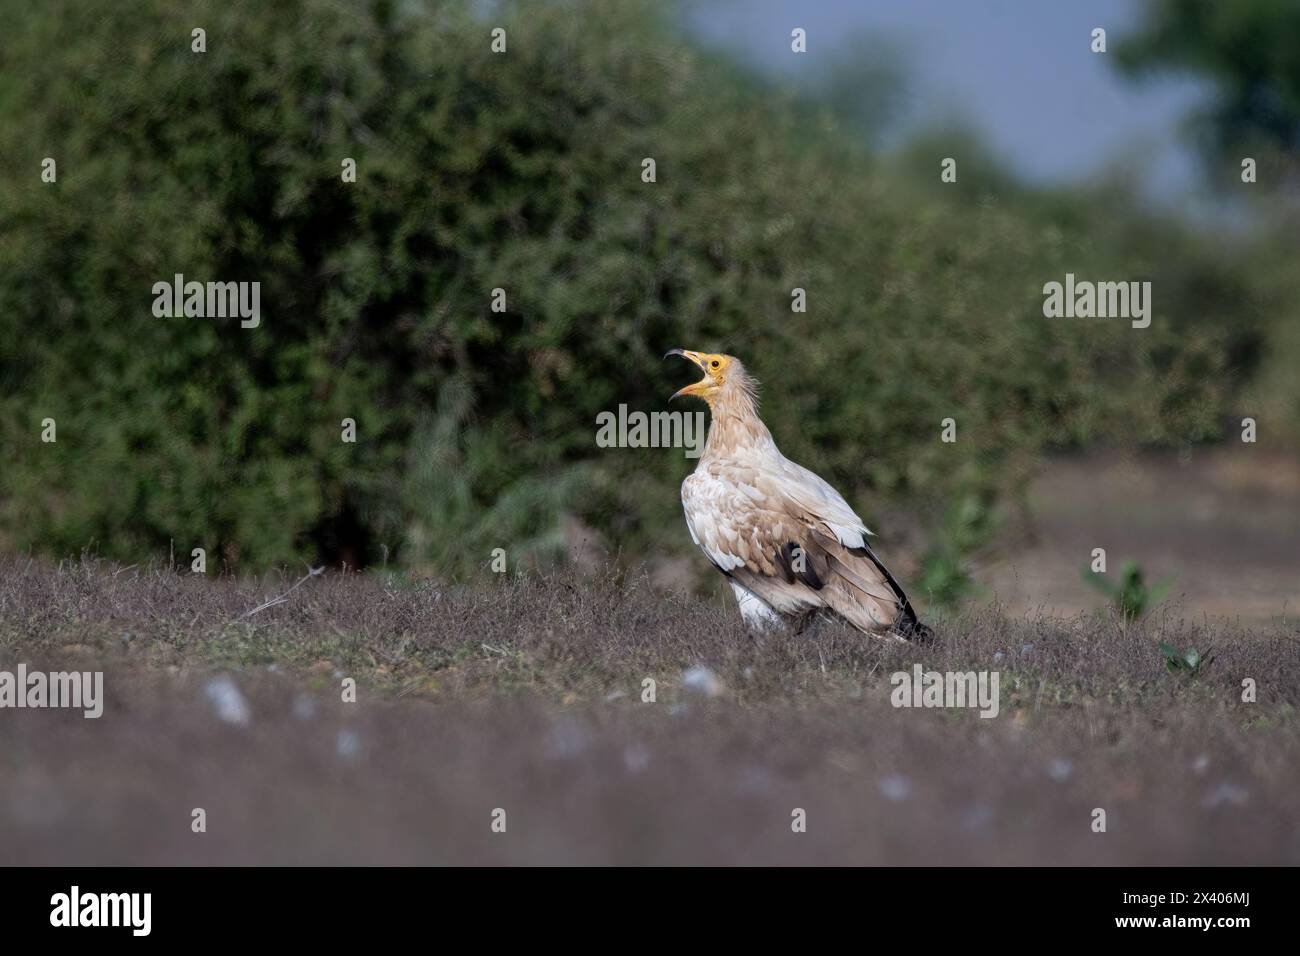 A group of Egyptian vultures perched on top of a tree branch inside Jorbeer conservation area during a wildlife safari Stock Photo